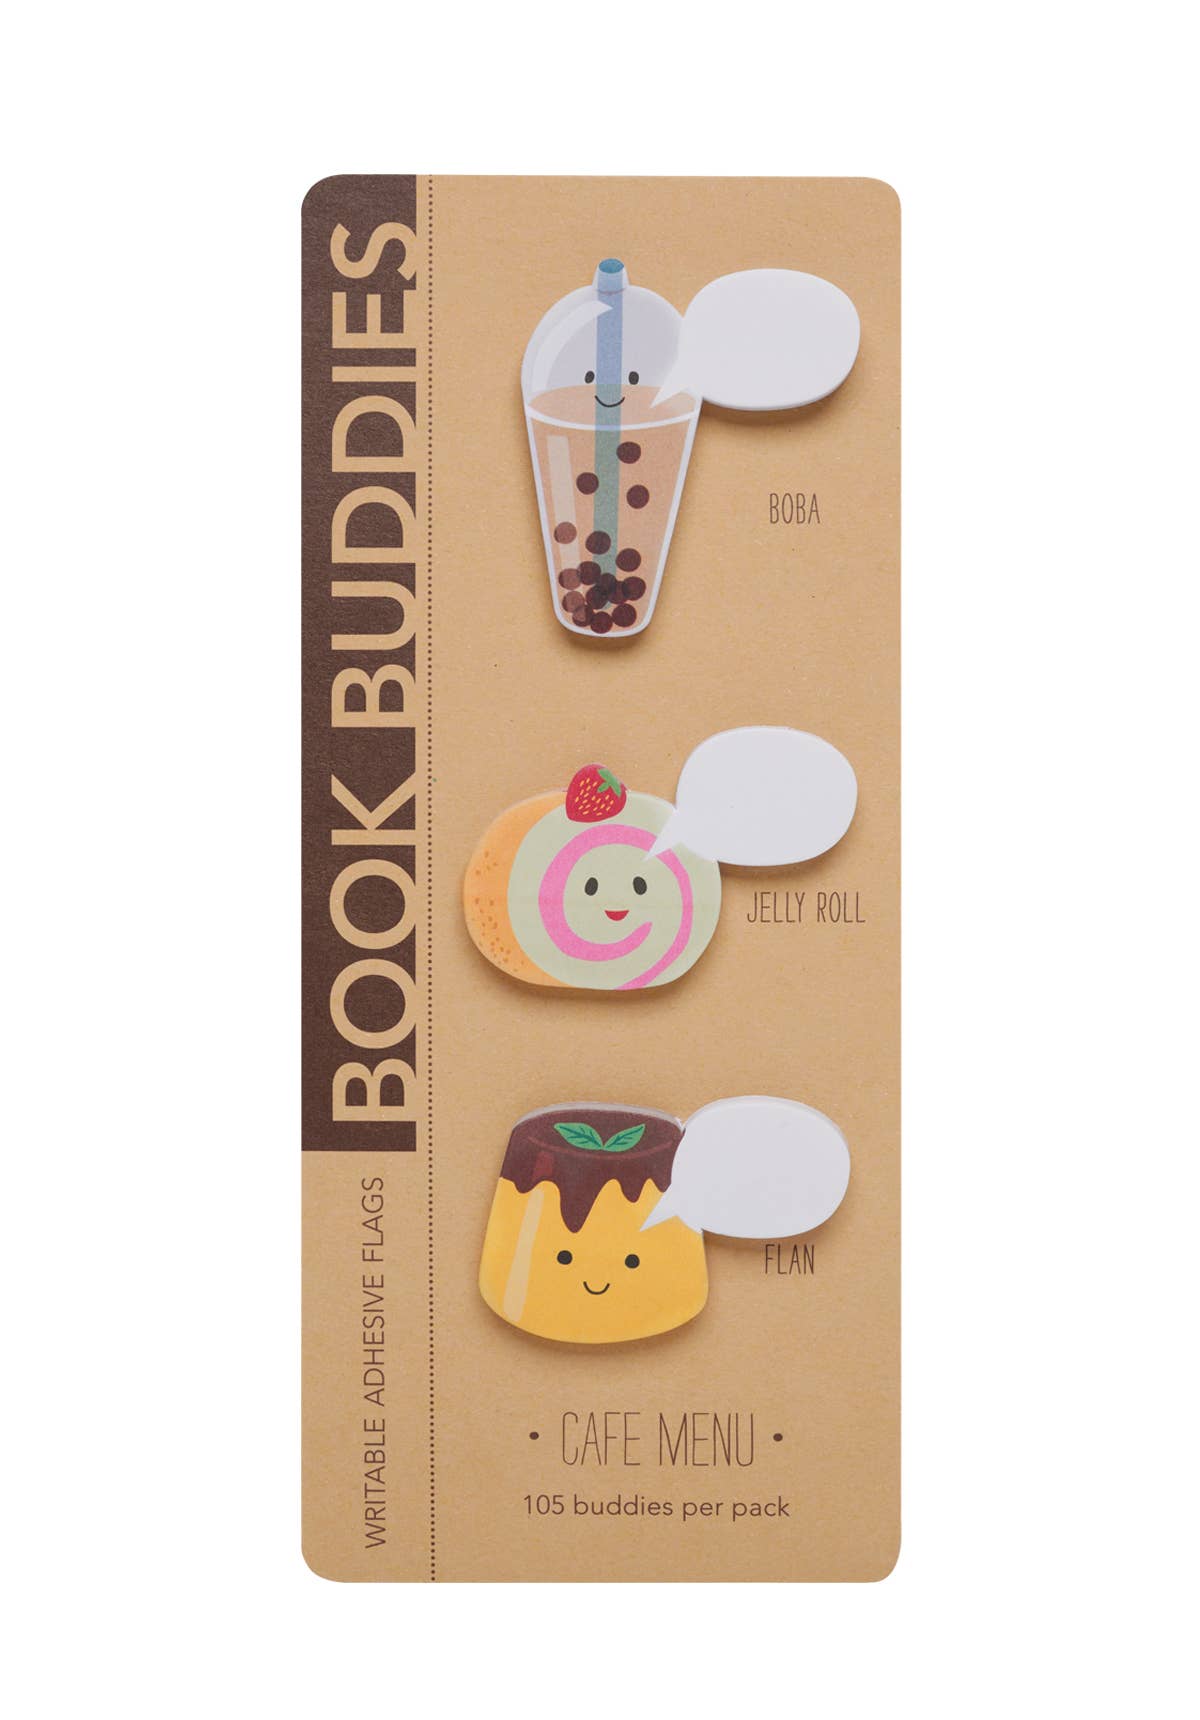 Trio of cafe book buddy page markers -- bubble tea drink, jelly roll and flan 